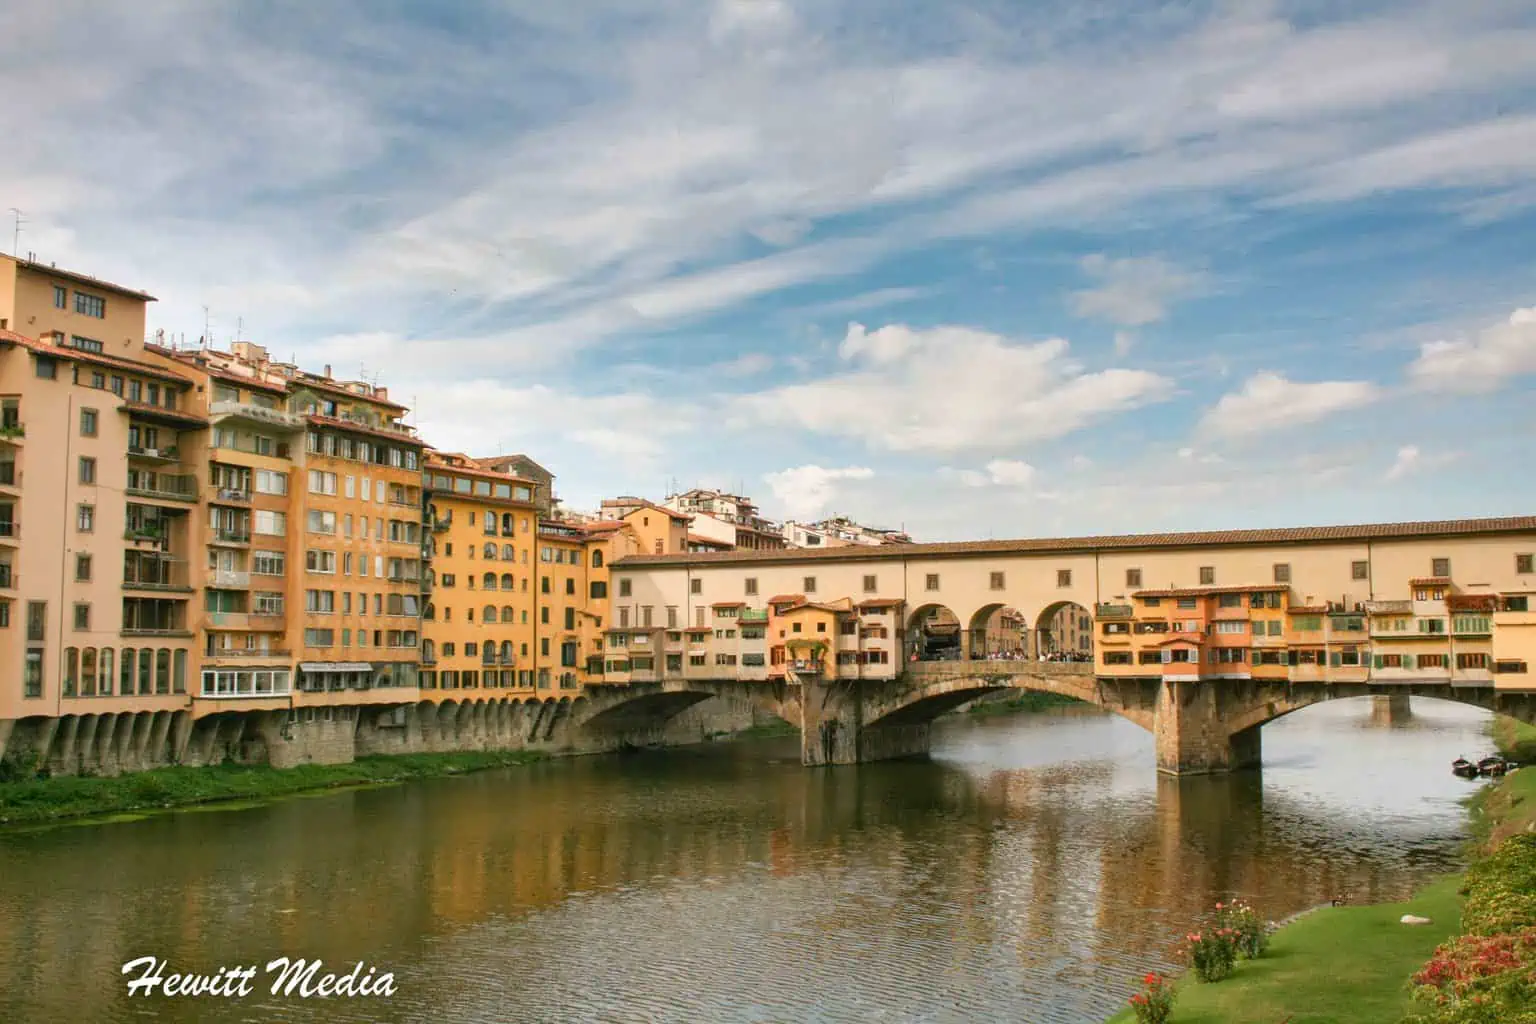 Europe's Top Destinations - Florence